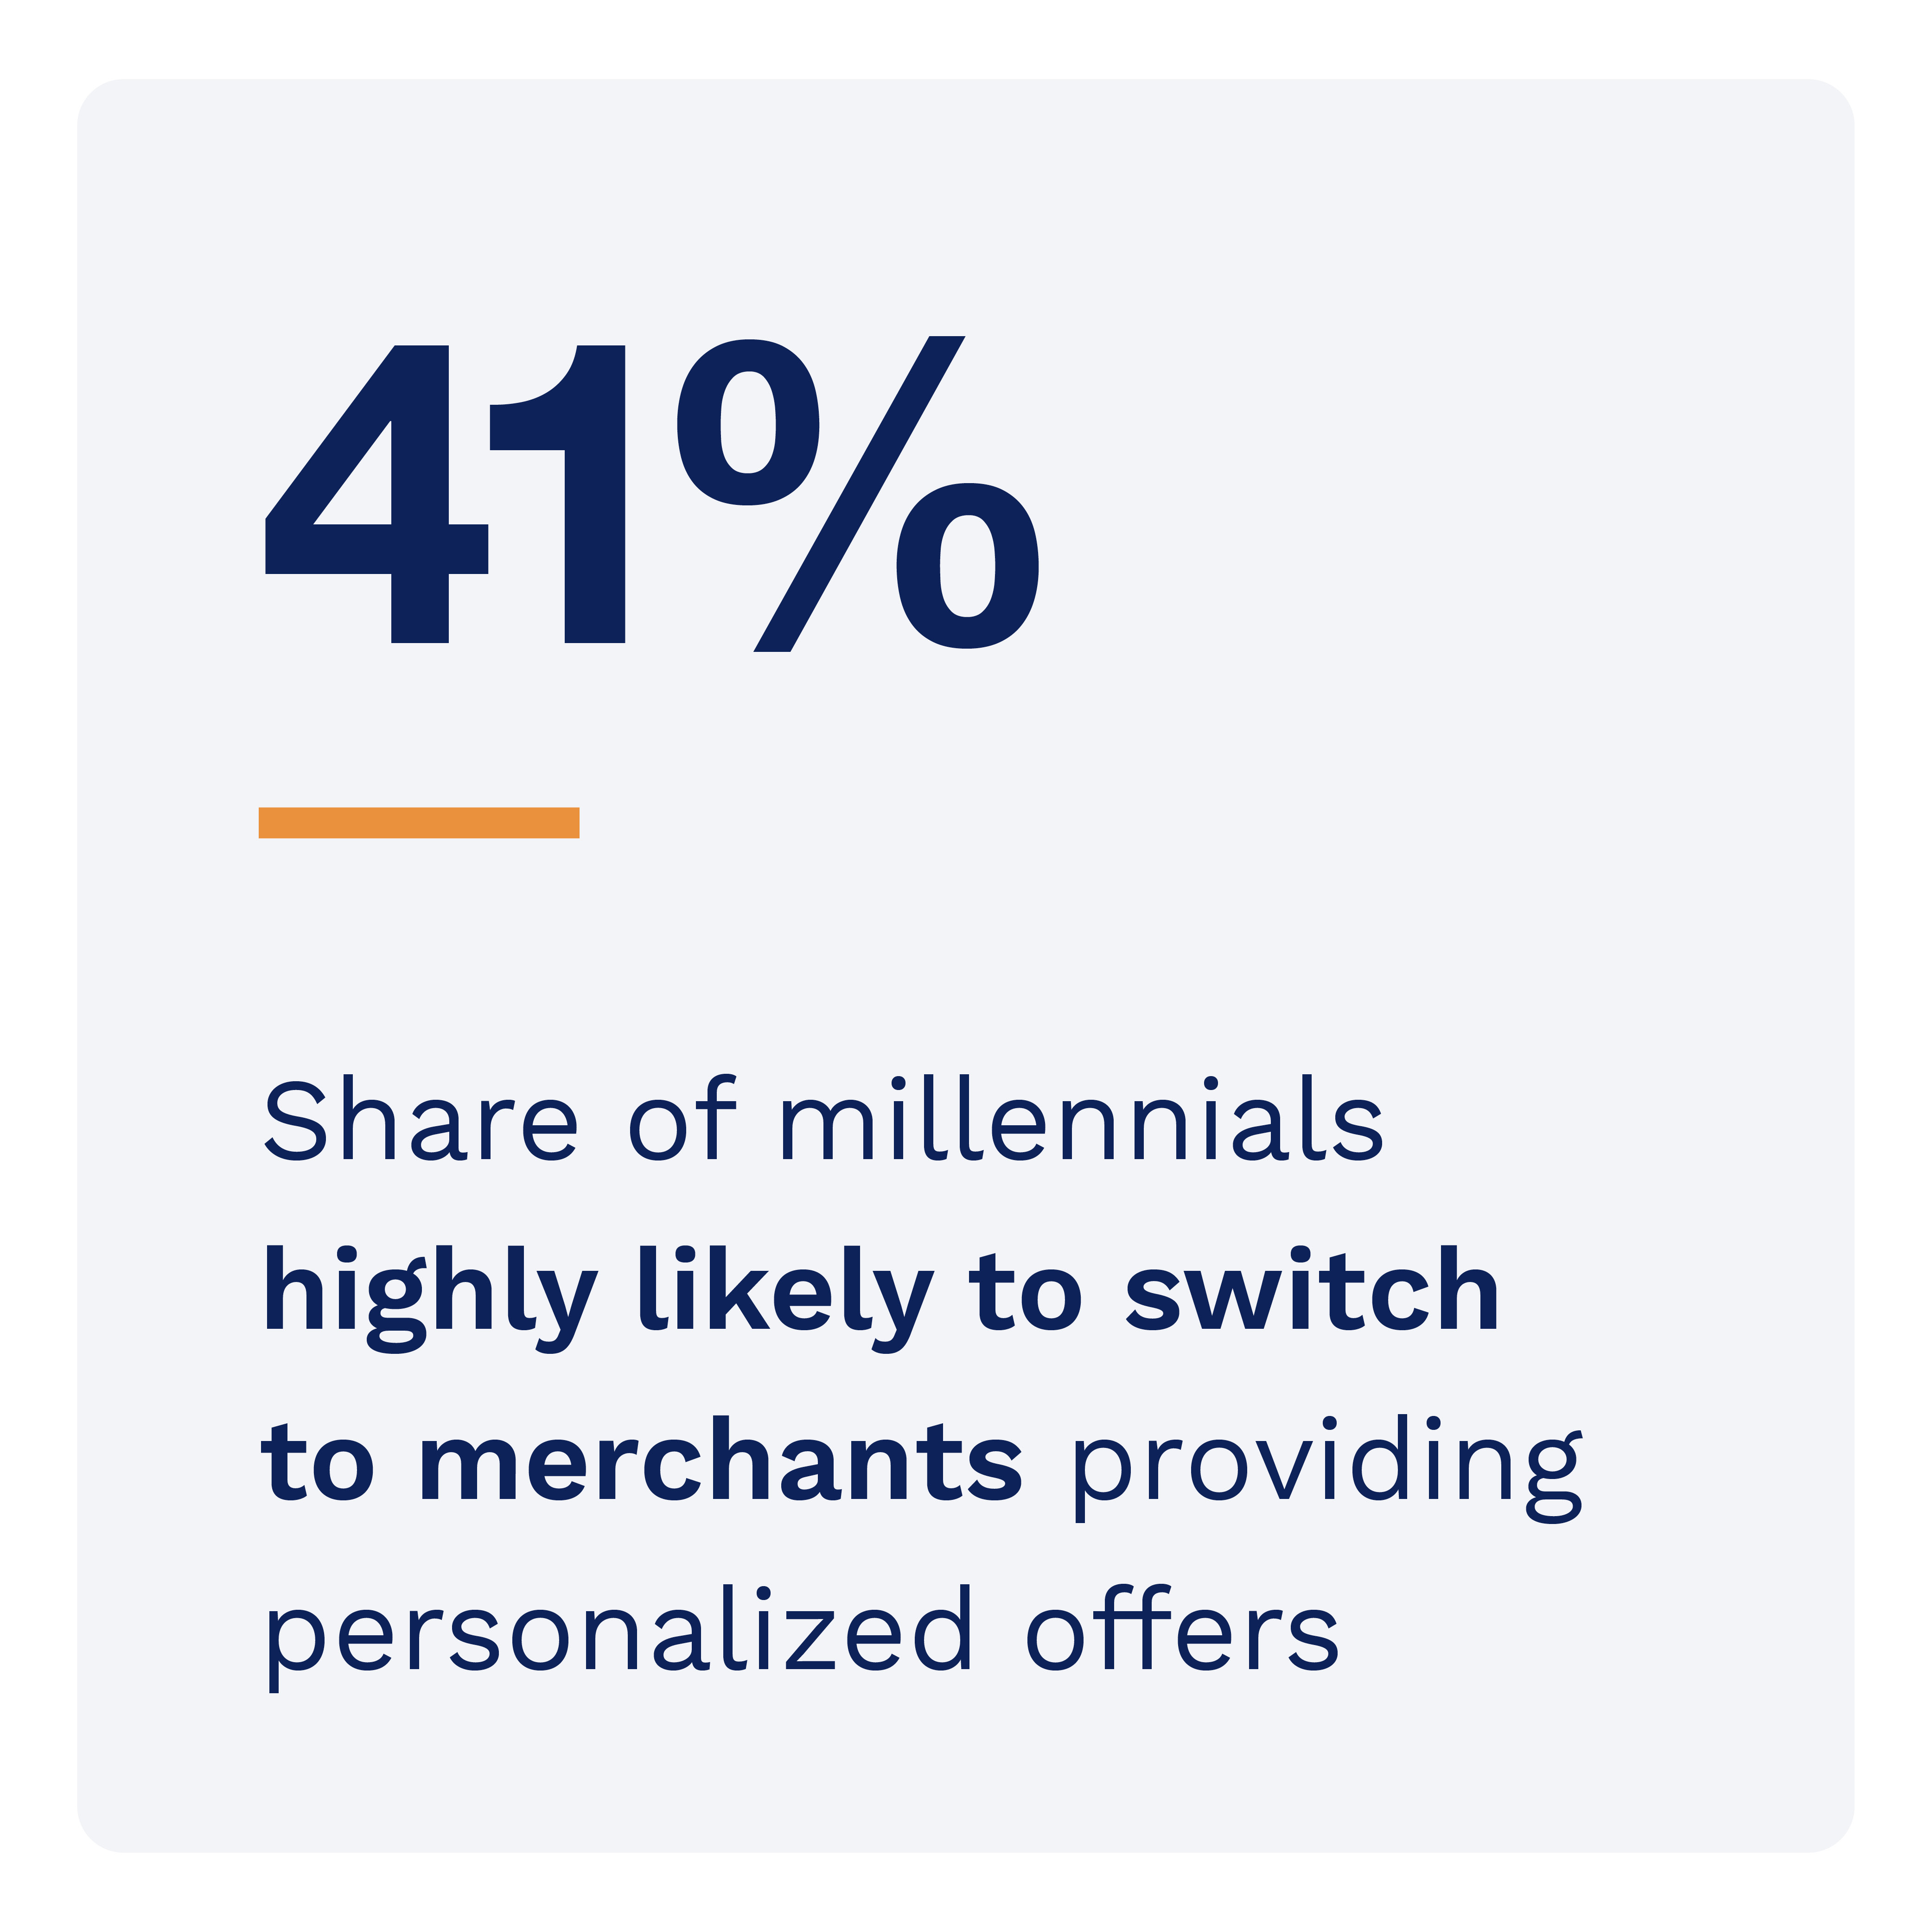 41%: Share of millennials highly likely to switch to merchants providing personalized offers